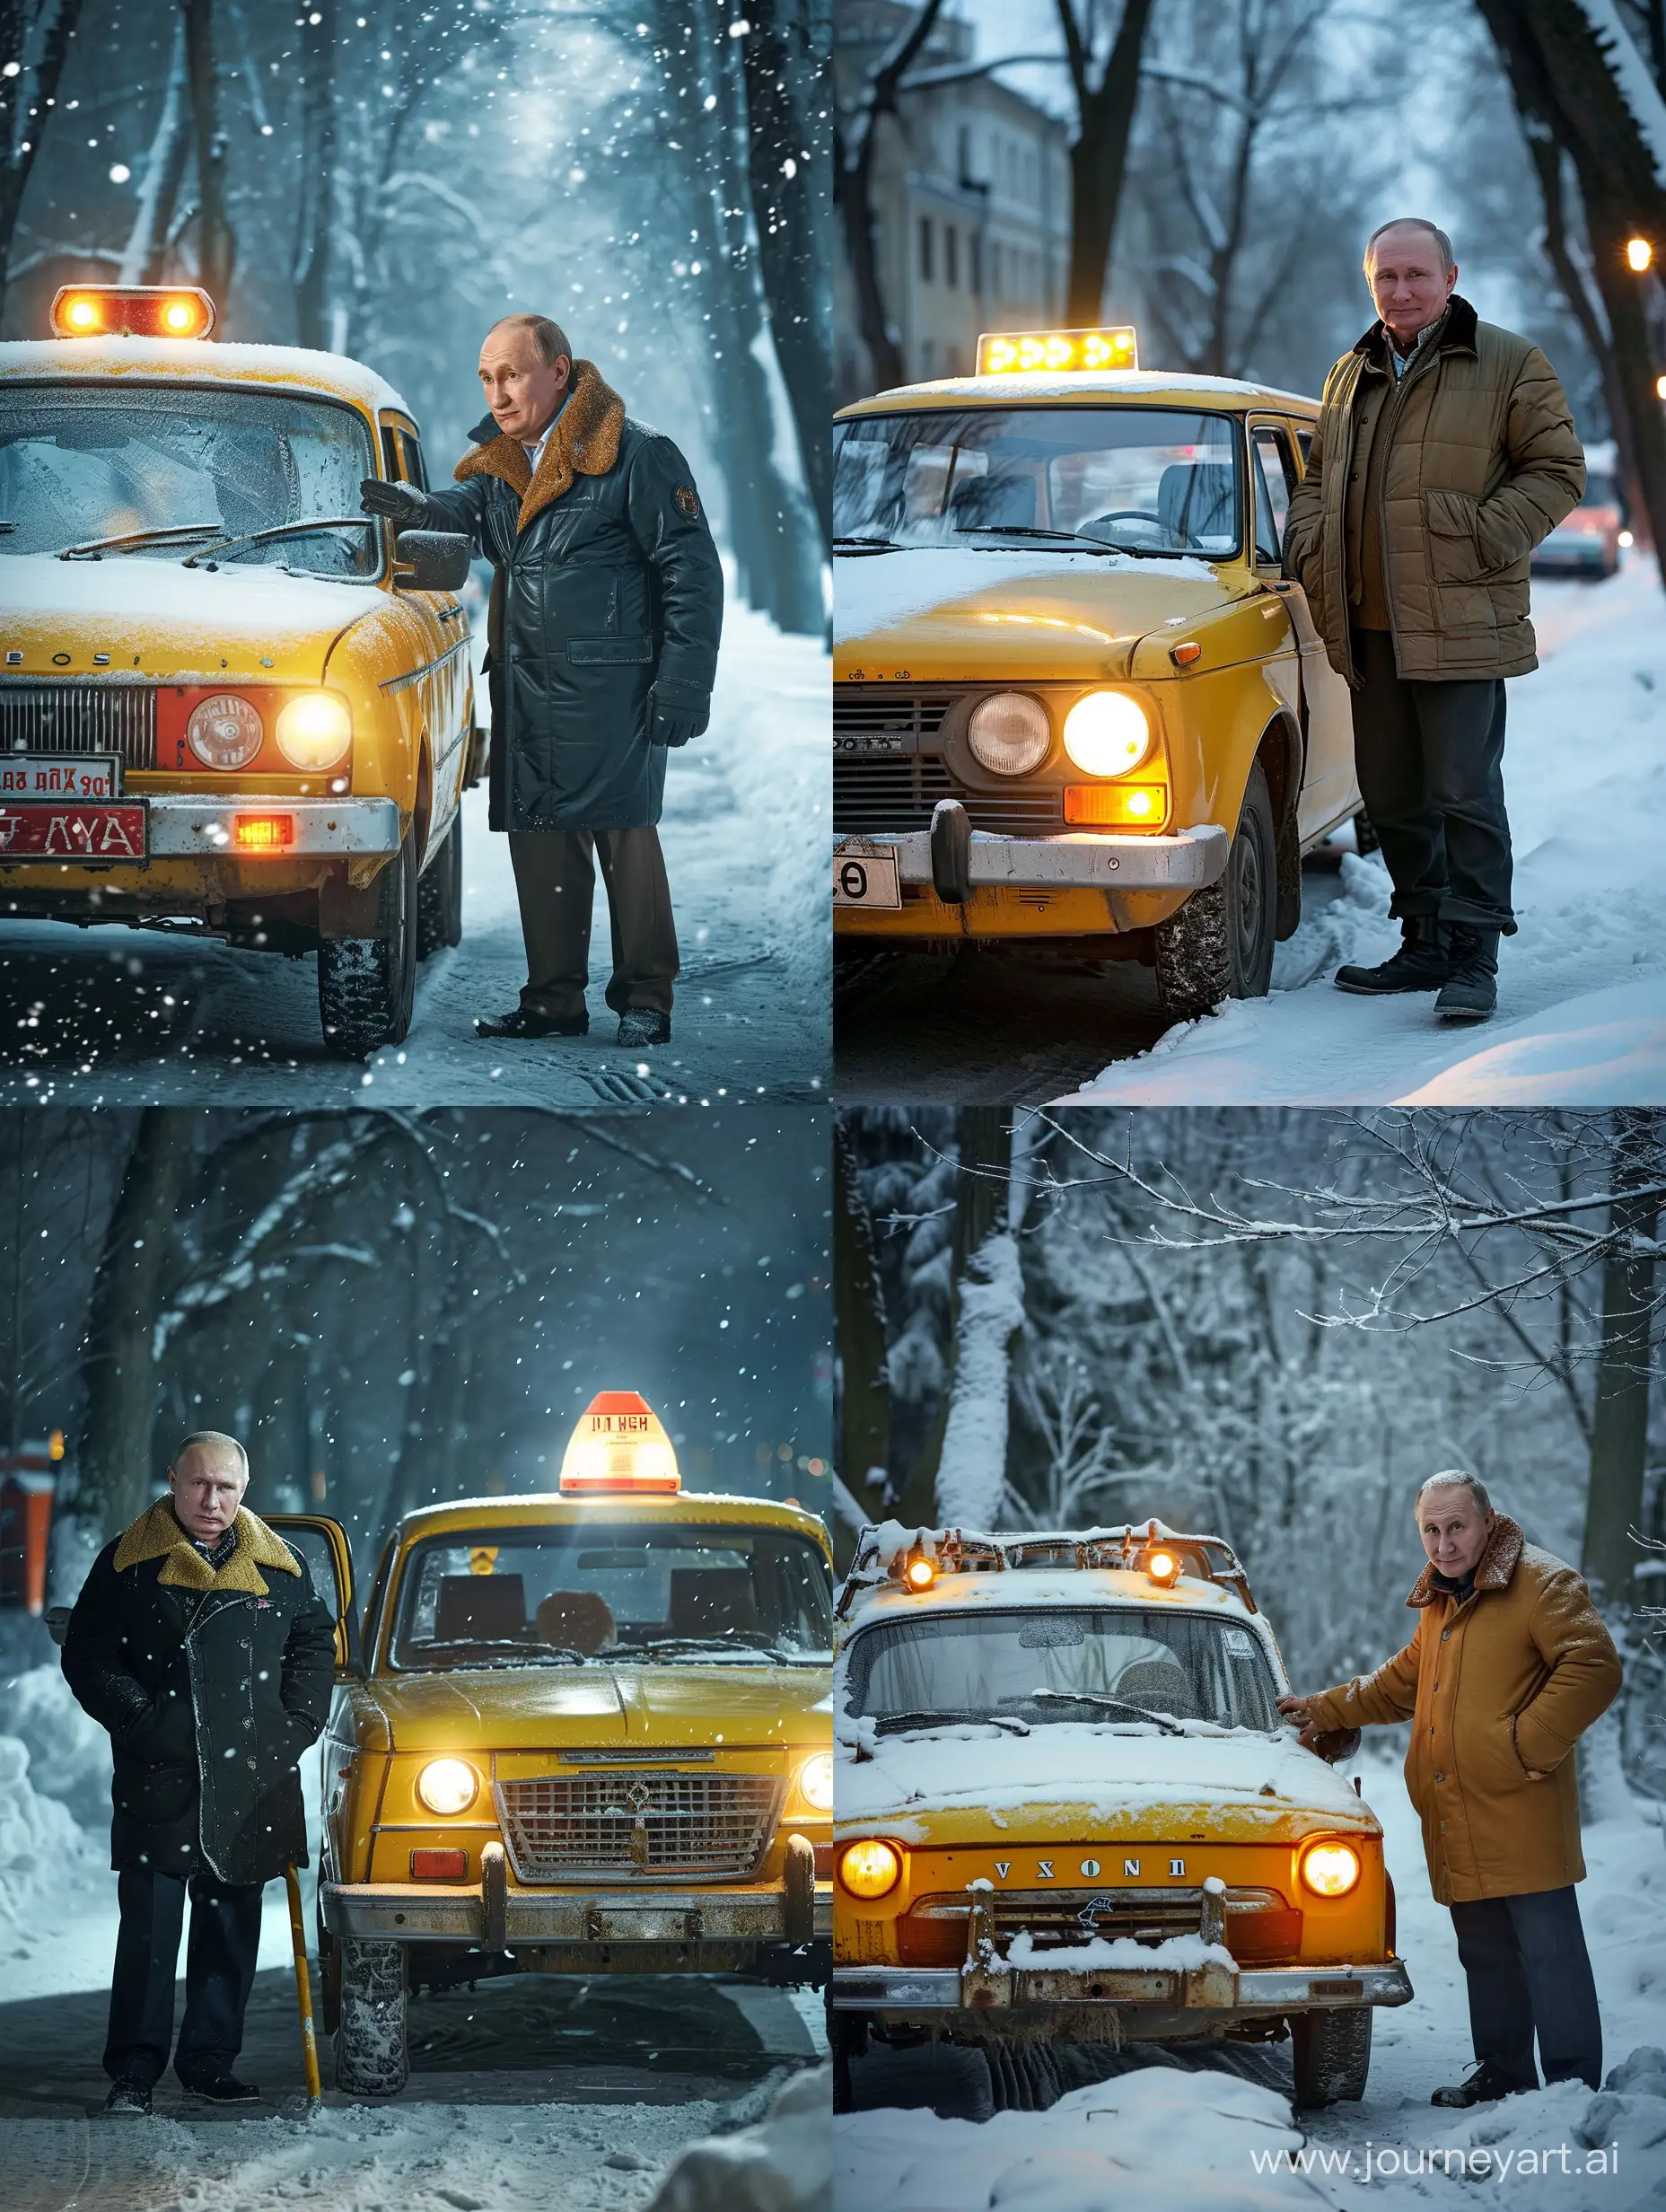 old vladimir putin as a poor russian taxi driver standing next to a yellow lada with lights on, winter